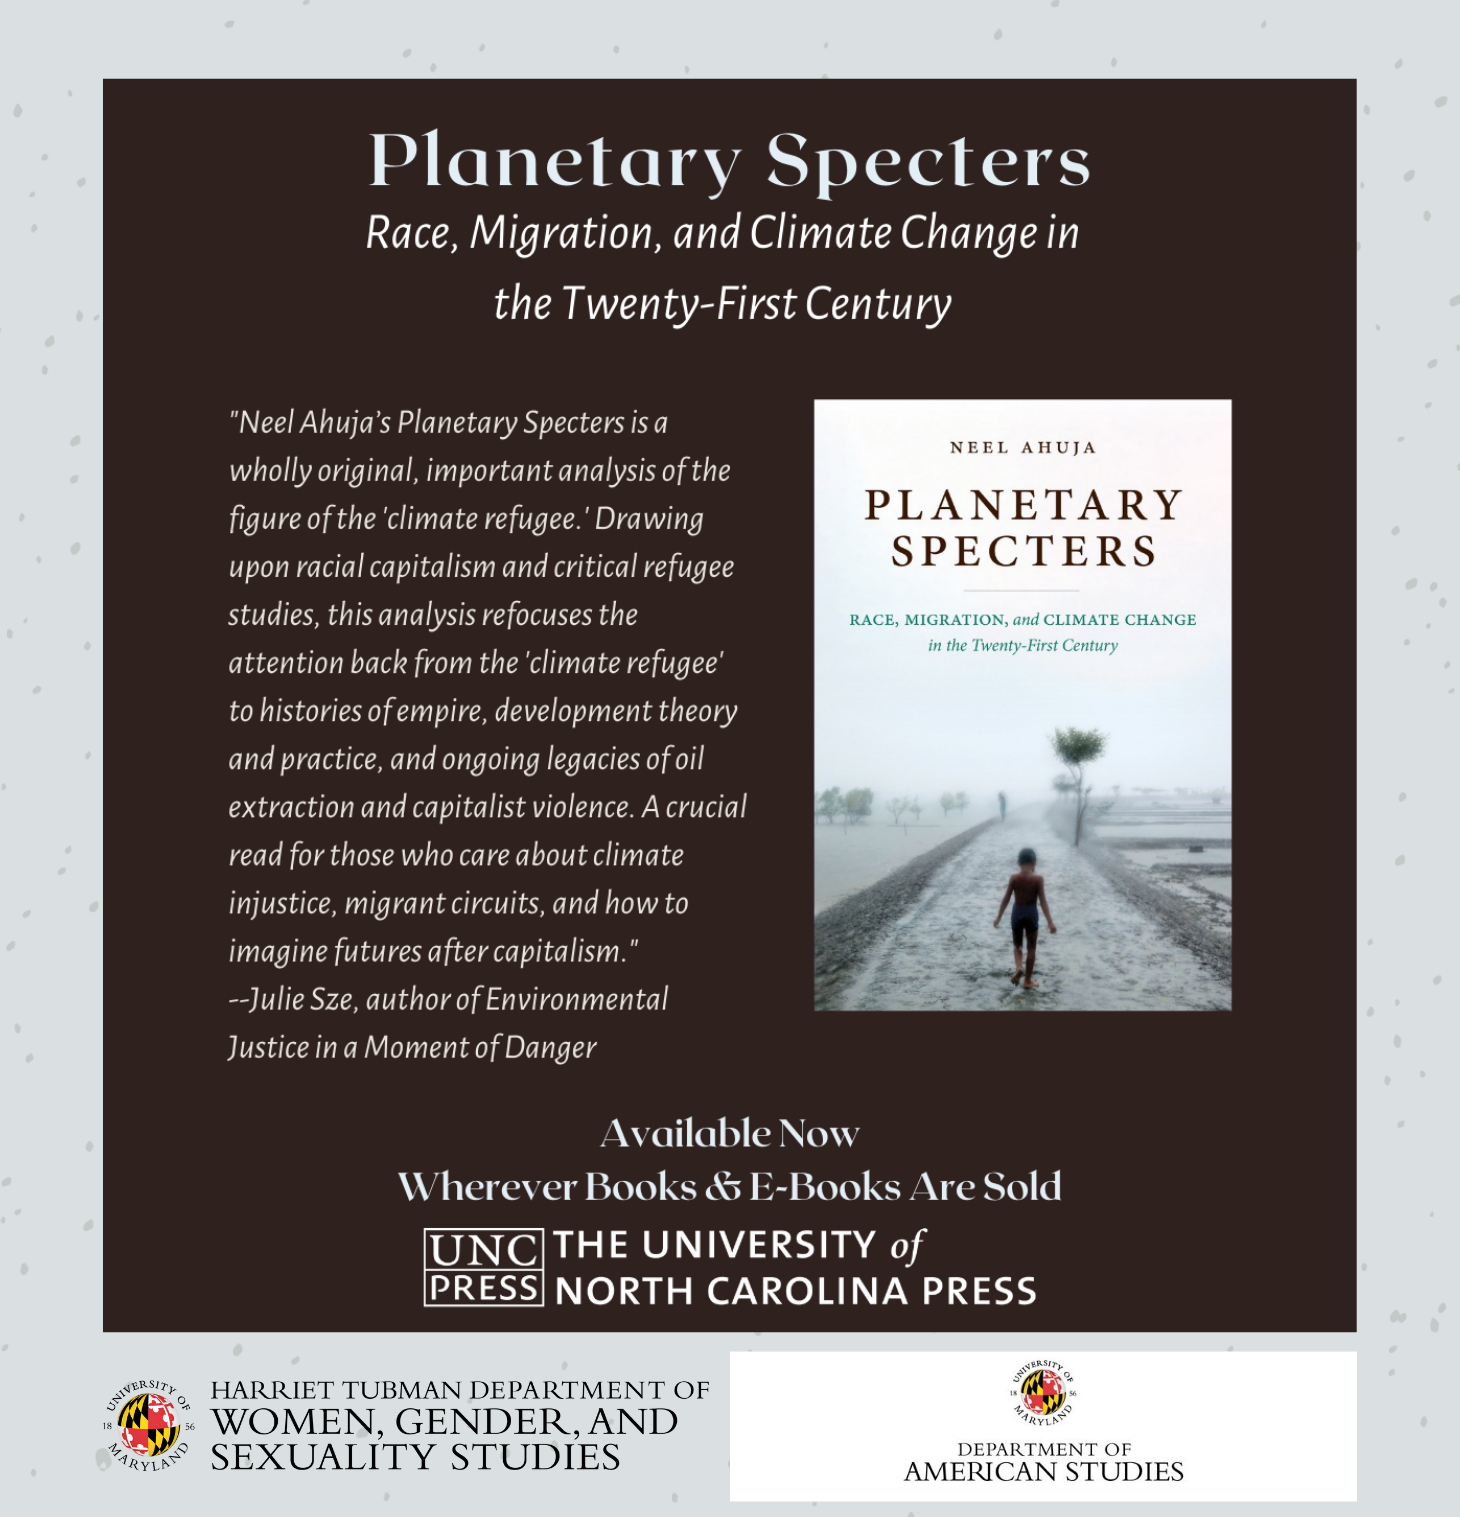 Planetary Specters Race, Migration, and Climate Change in the Twenty-First Century By Neel Ahuja book cover and logos for WGSS and WMST